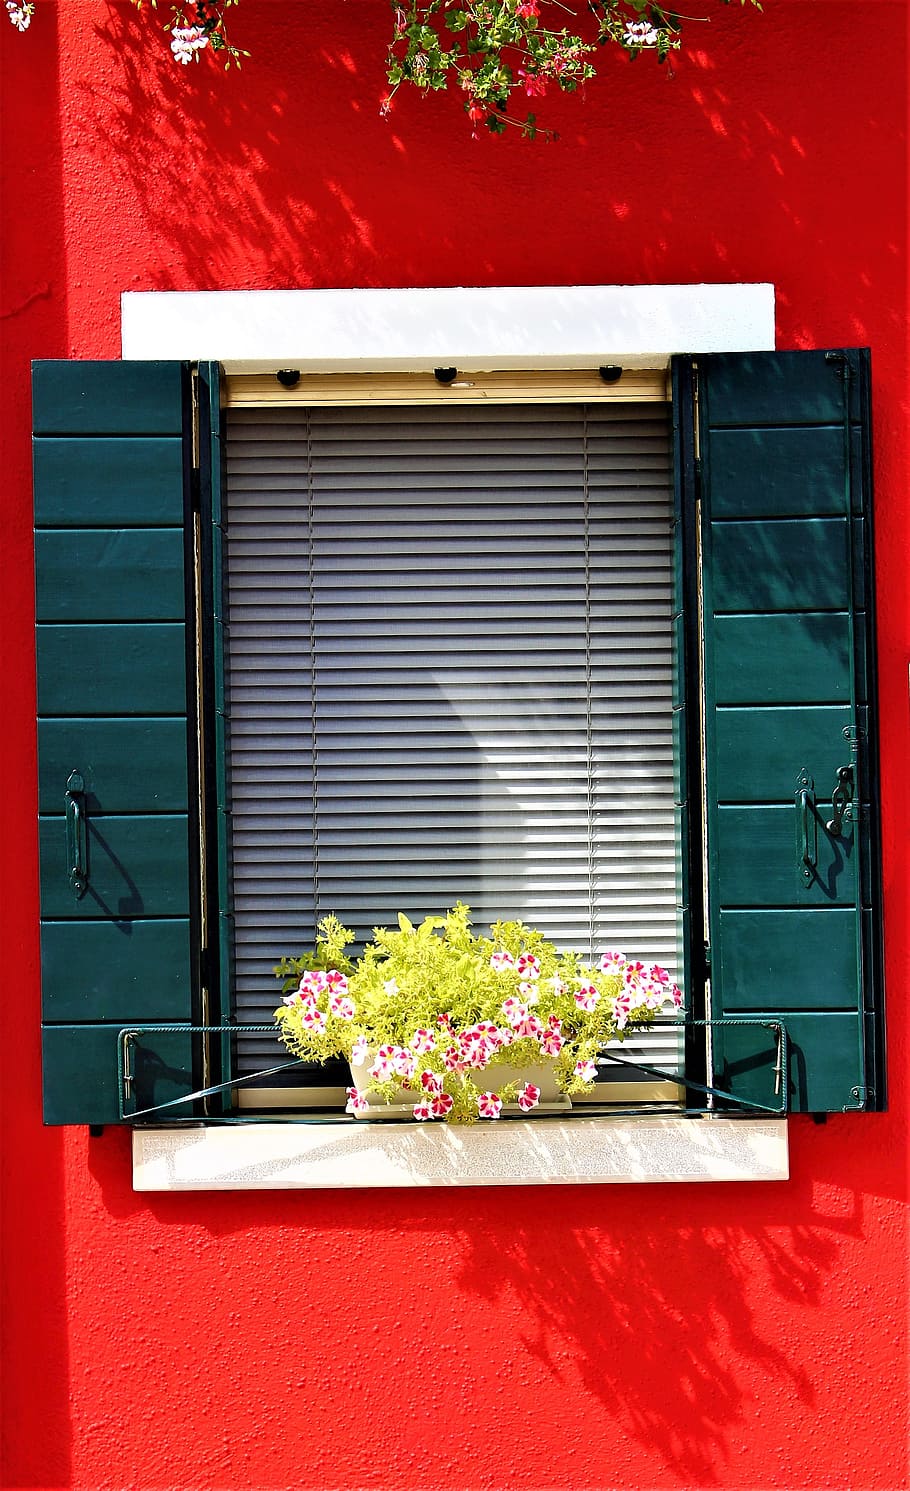 window, venice, burano, italy, colorful, picturesquely, shutters, old house, architecture, stone-built house